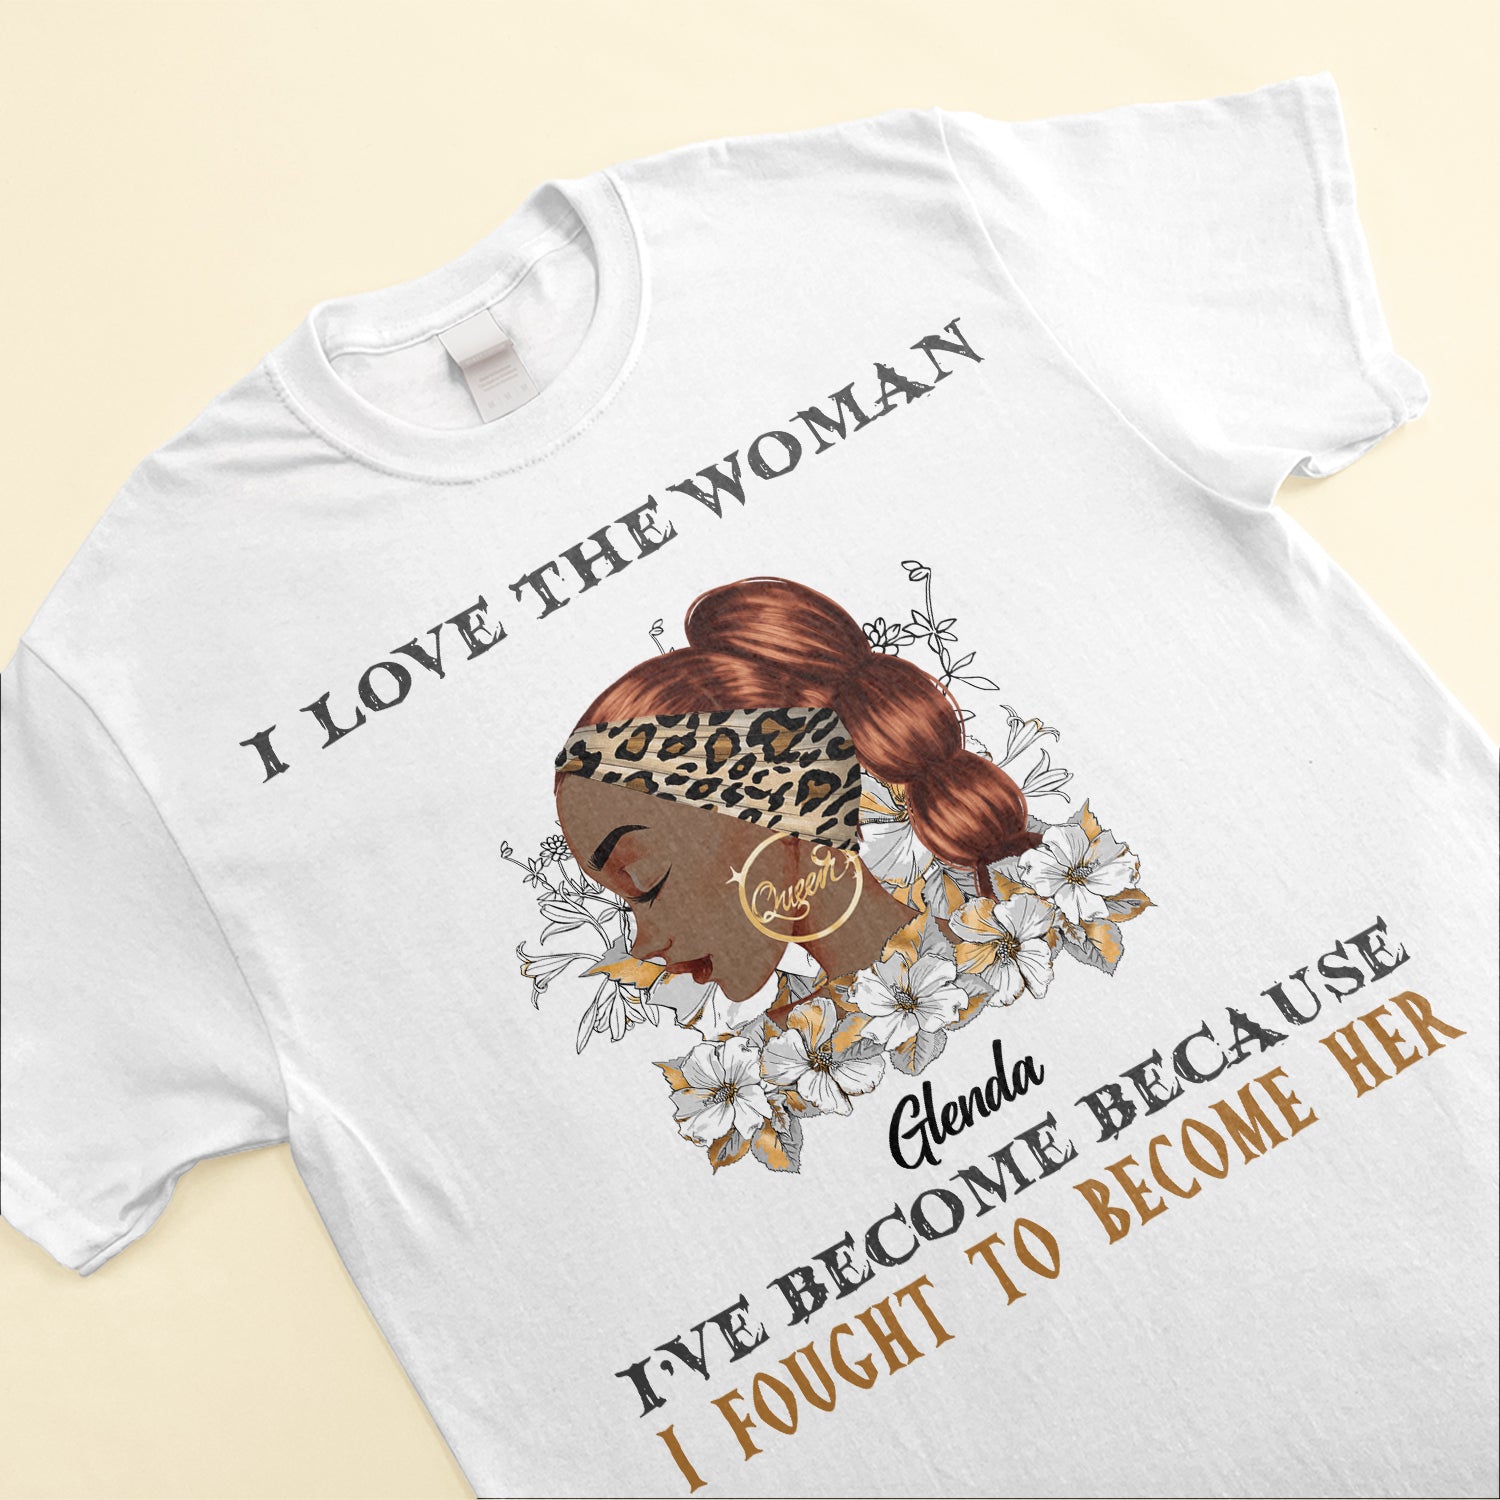 I Fought To Become Her - Personalized Shirt - Gift For Black Girl, Black Woman